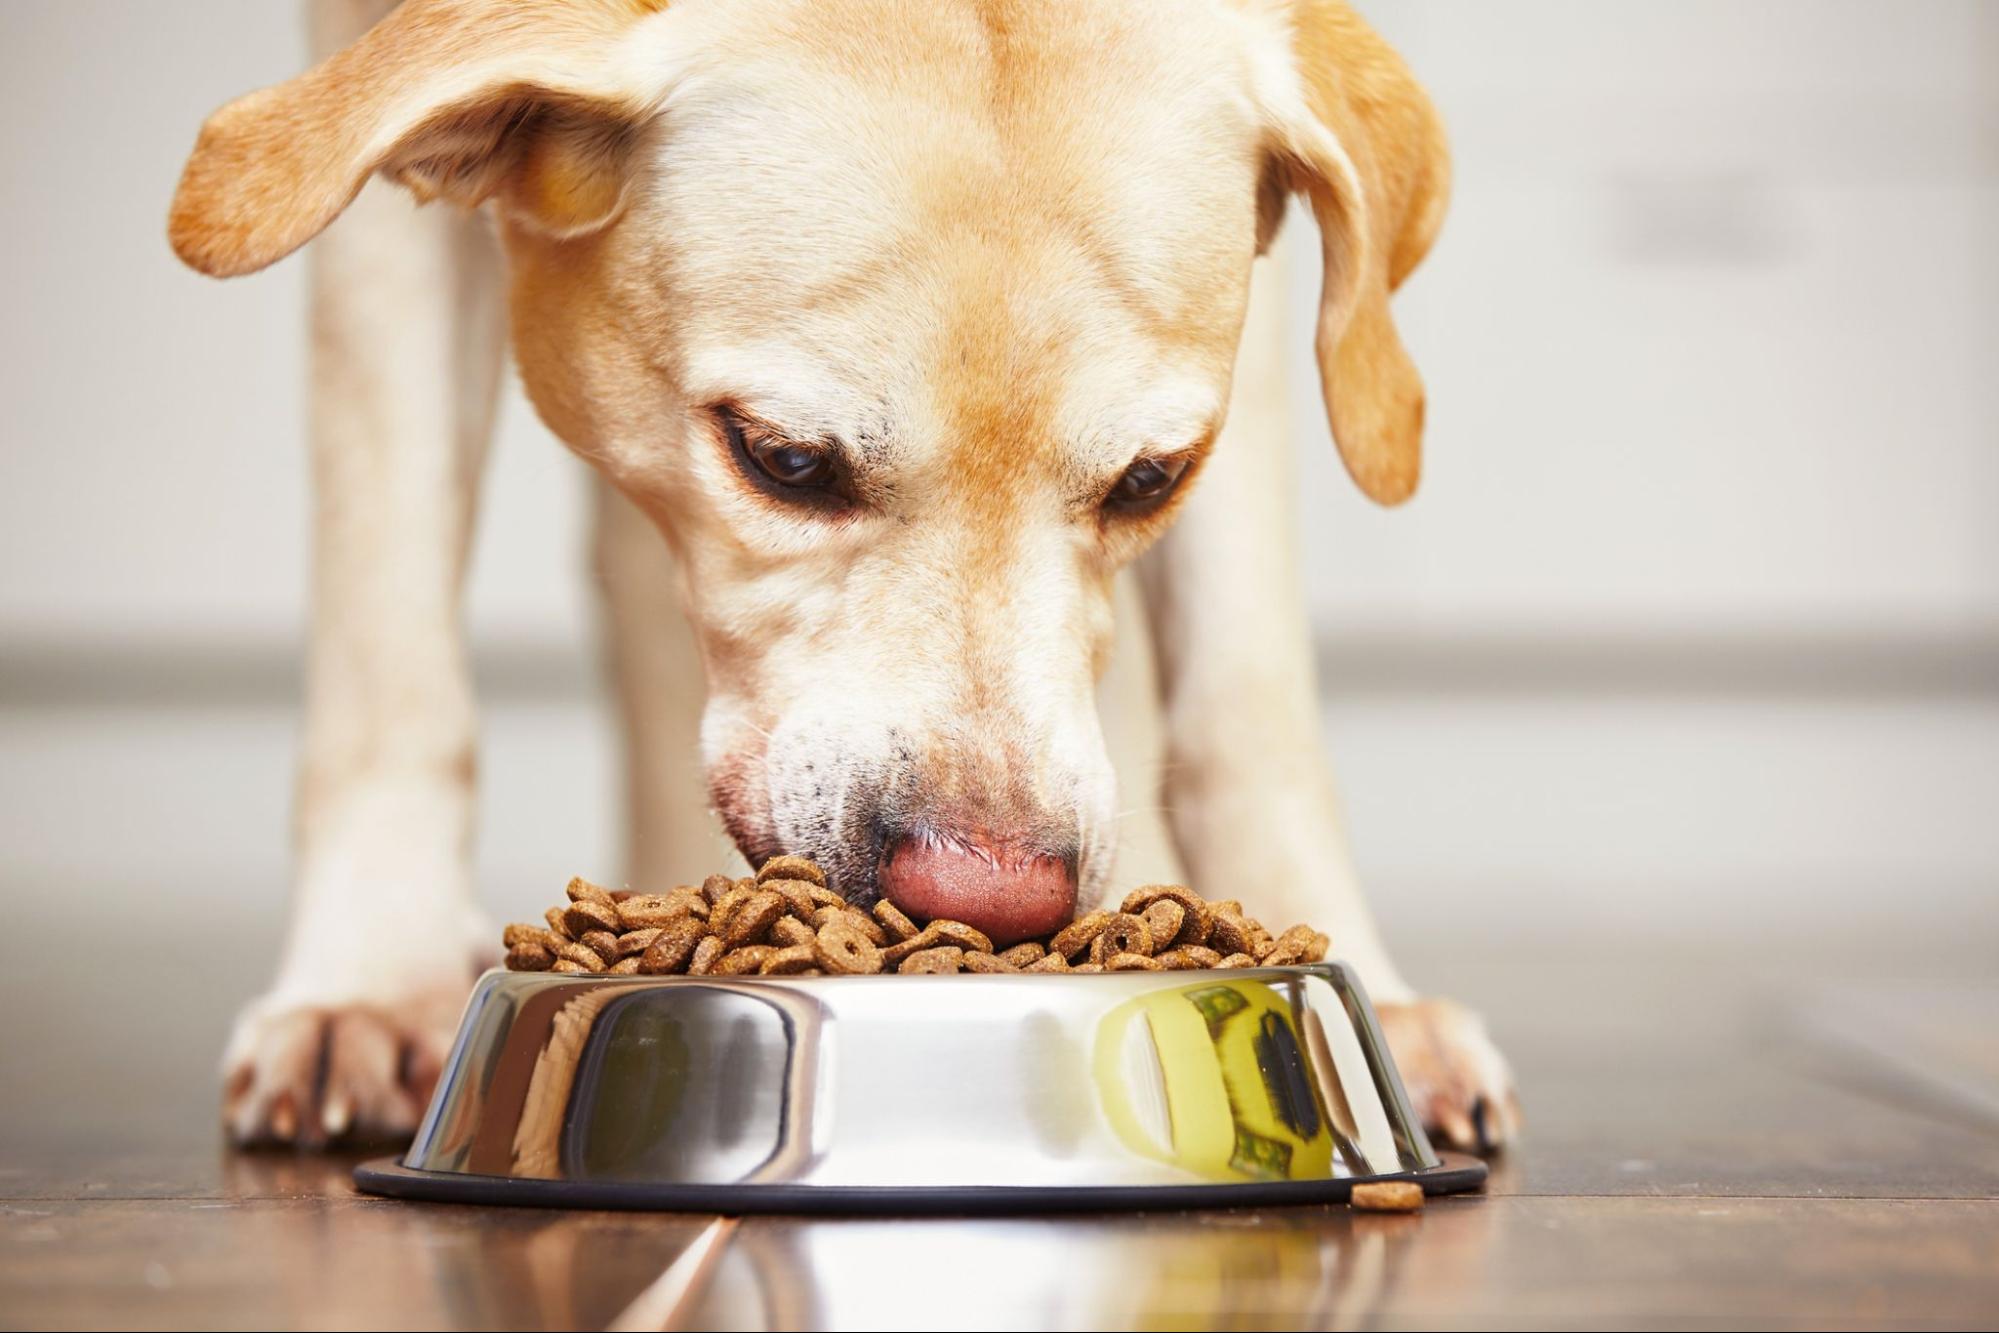 A dog eats their food out of a bowl